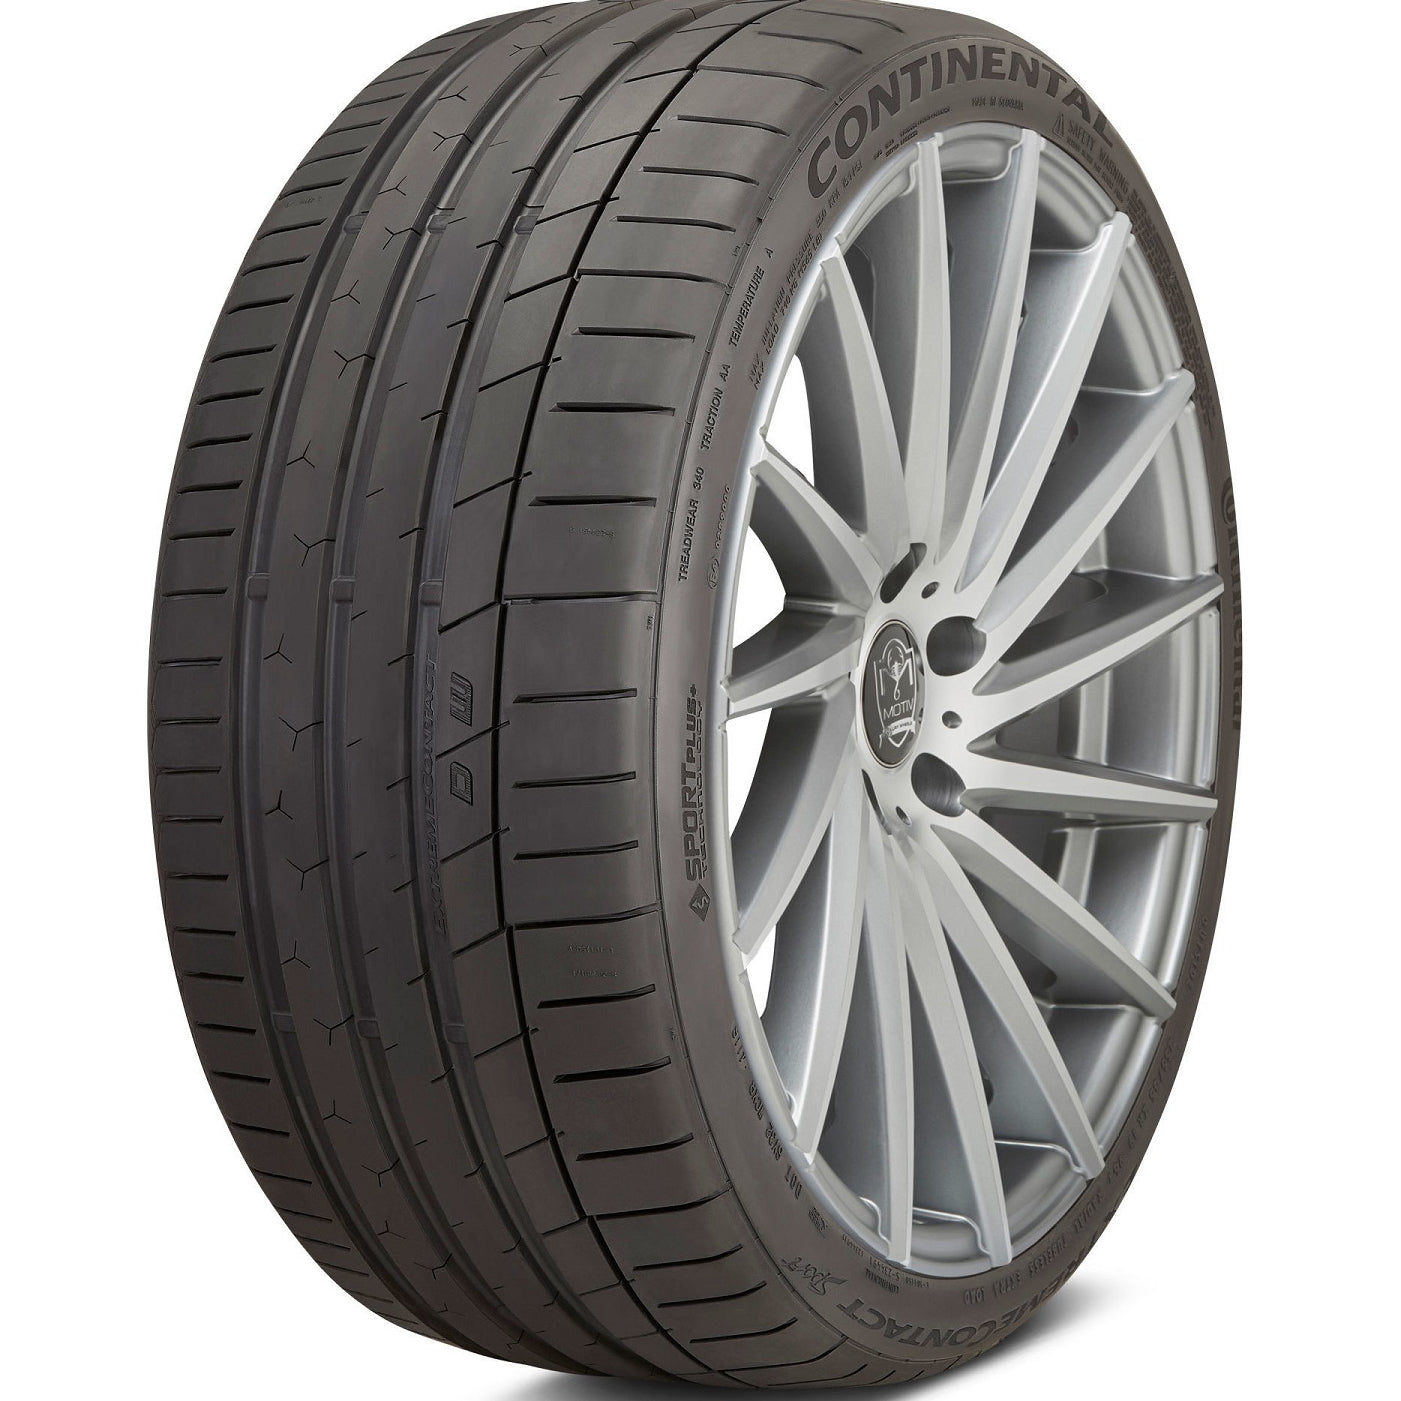 CONTINENTAL EXTREMECONTACT SPORT 245/40ZR19 (26.7X9.7R 19) Tires